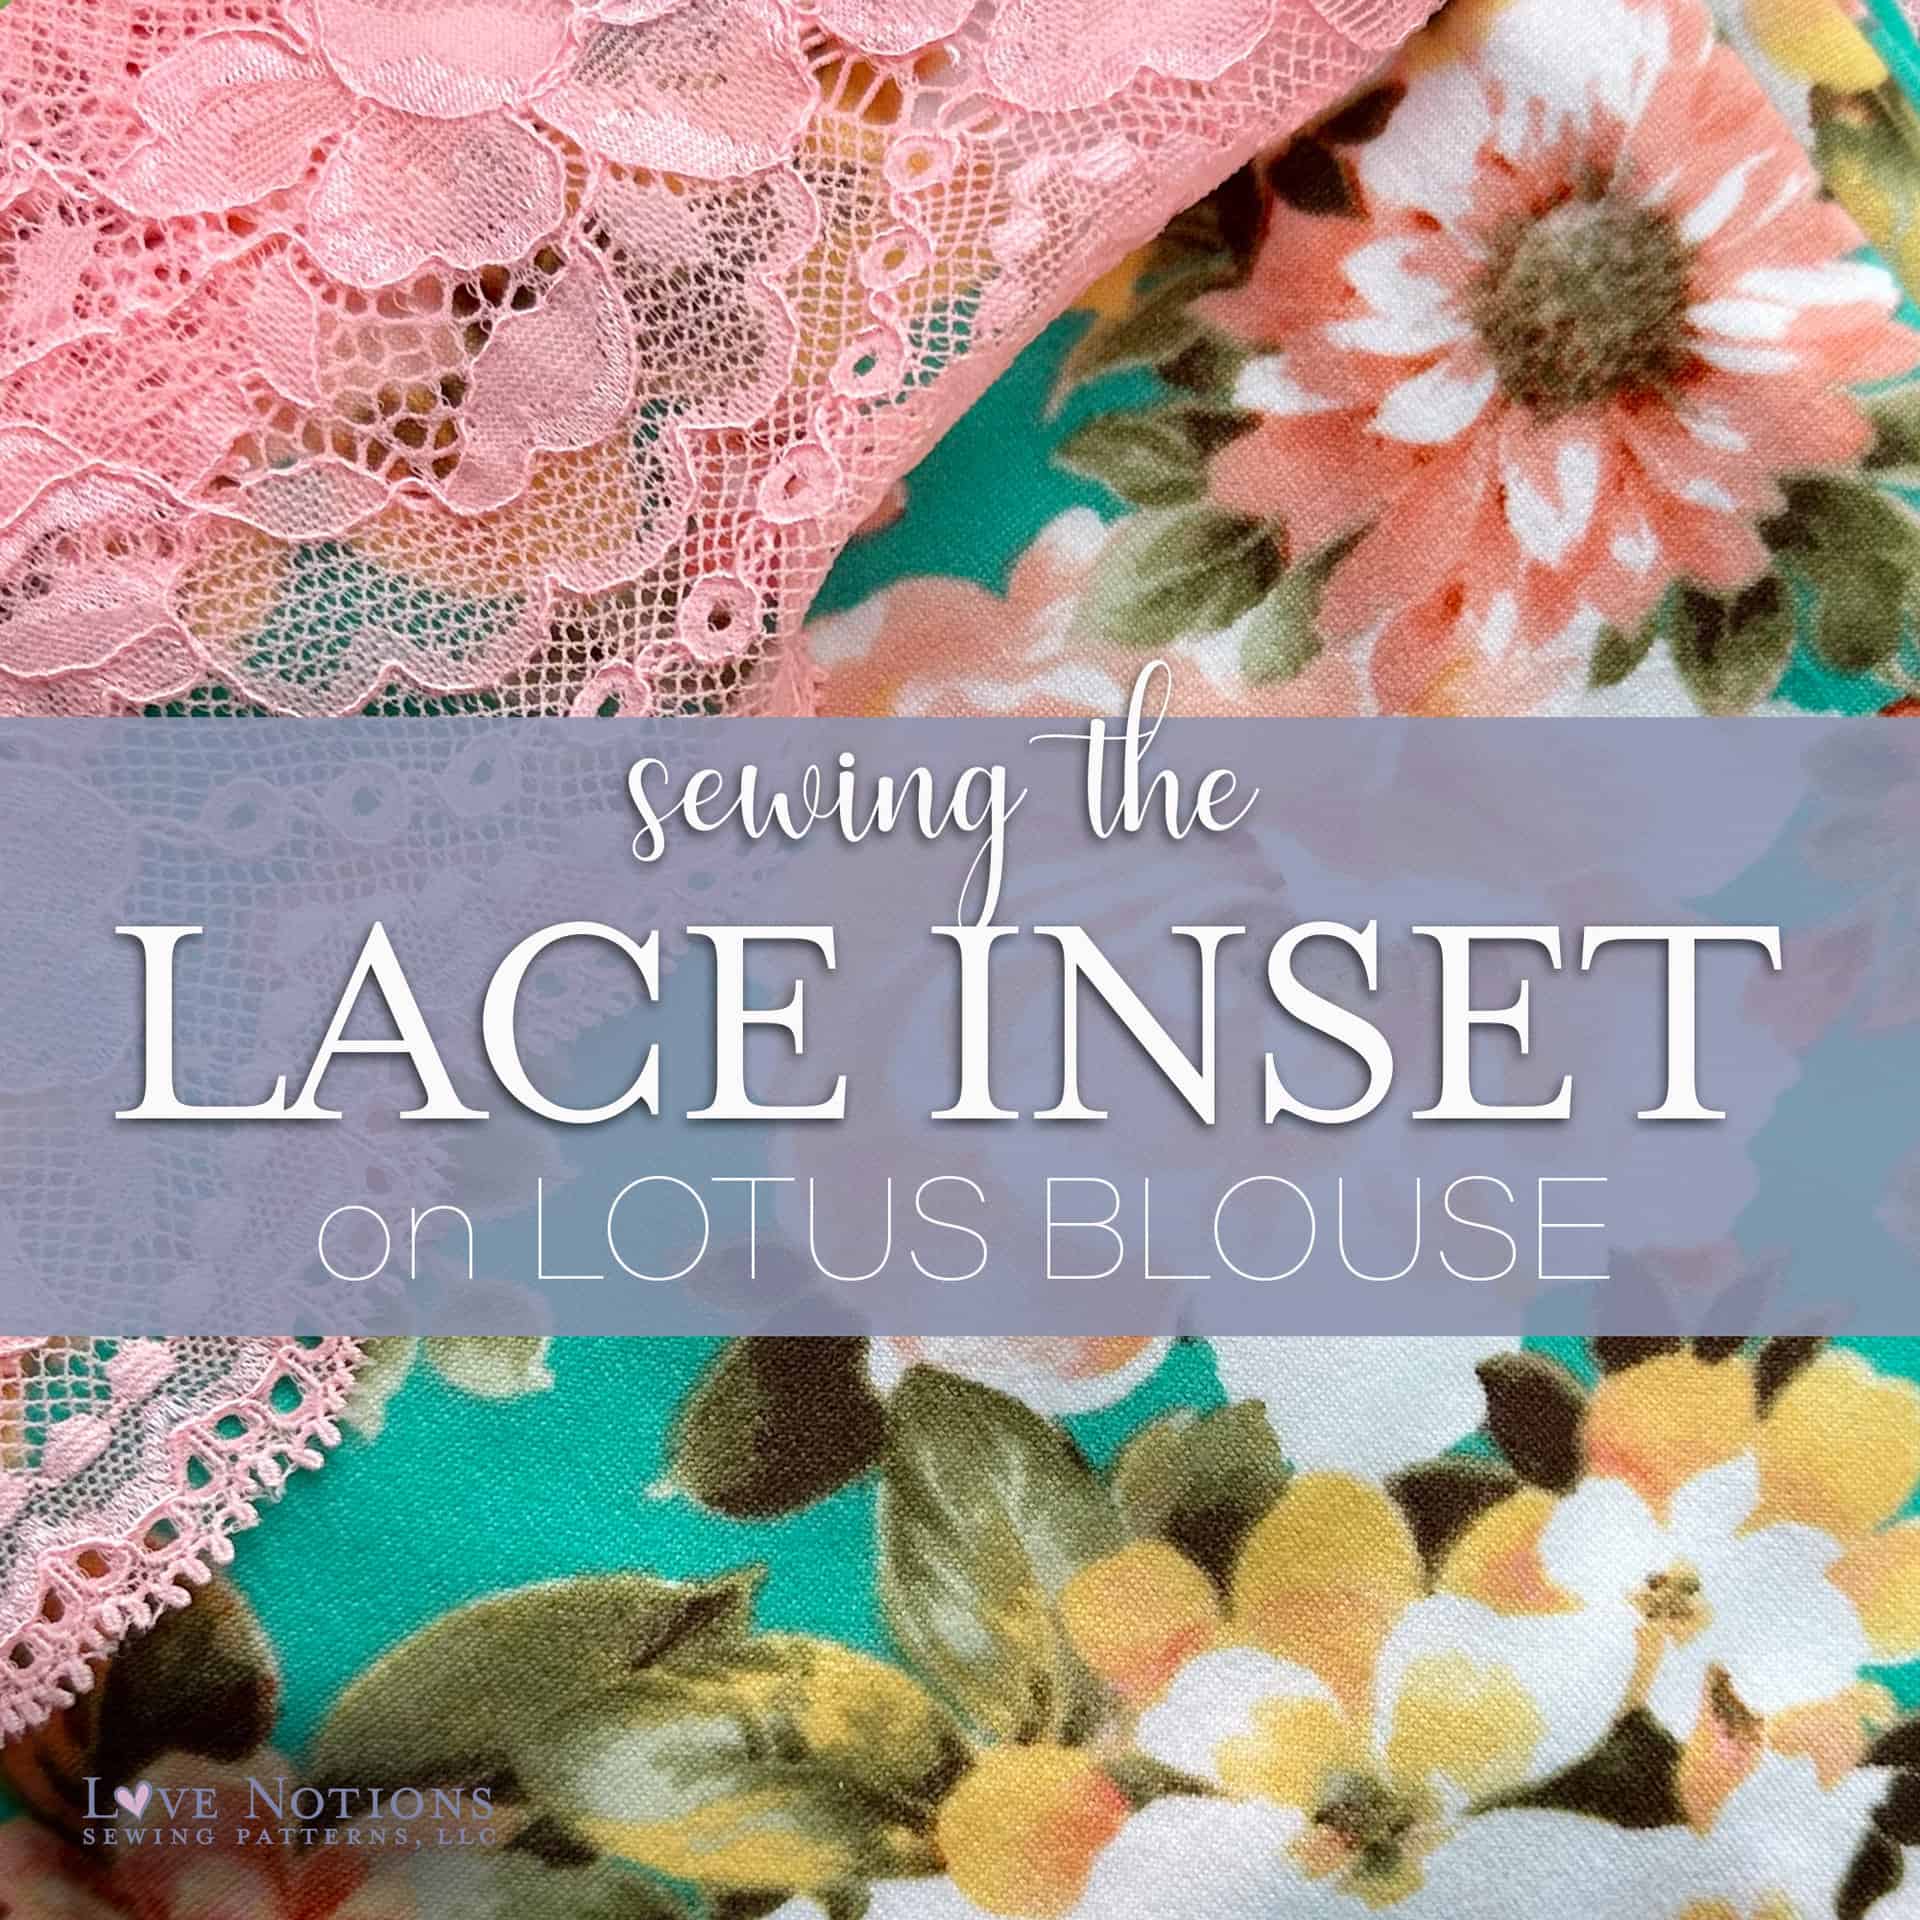 How to Sew Lace: Tips, and Tricks for Working with Lace